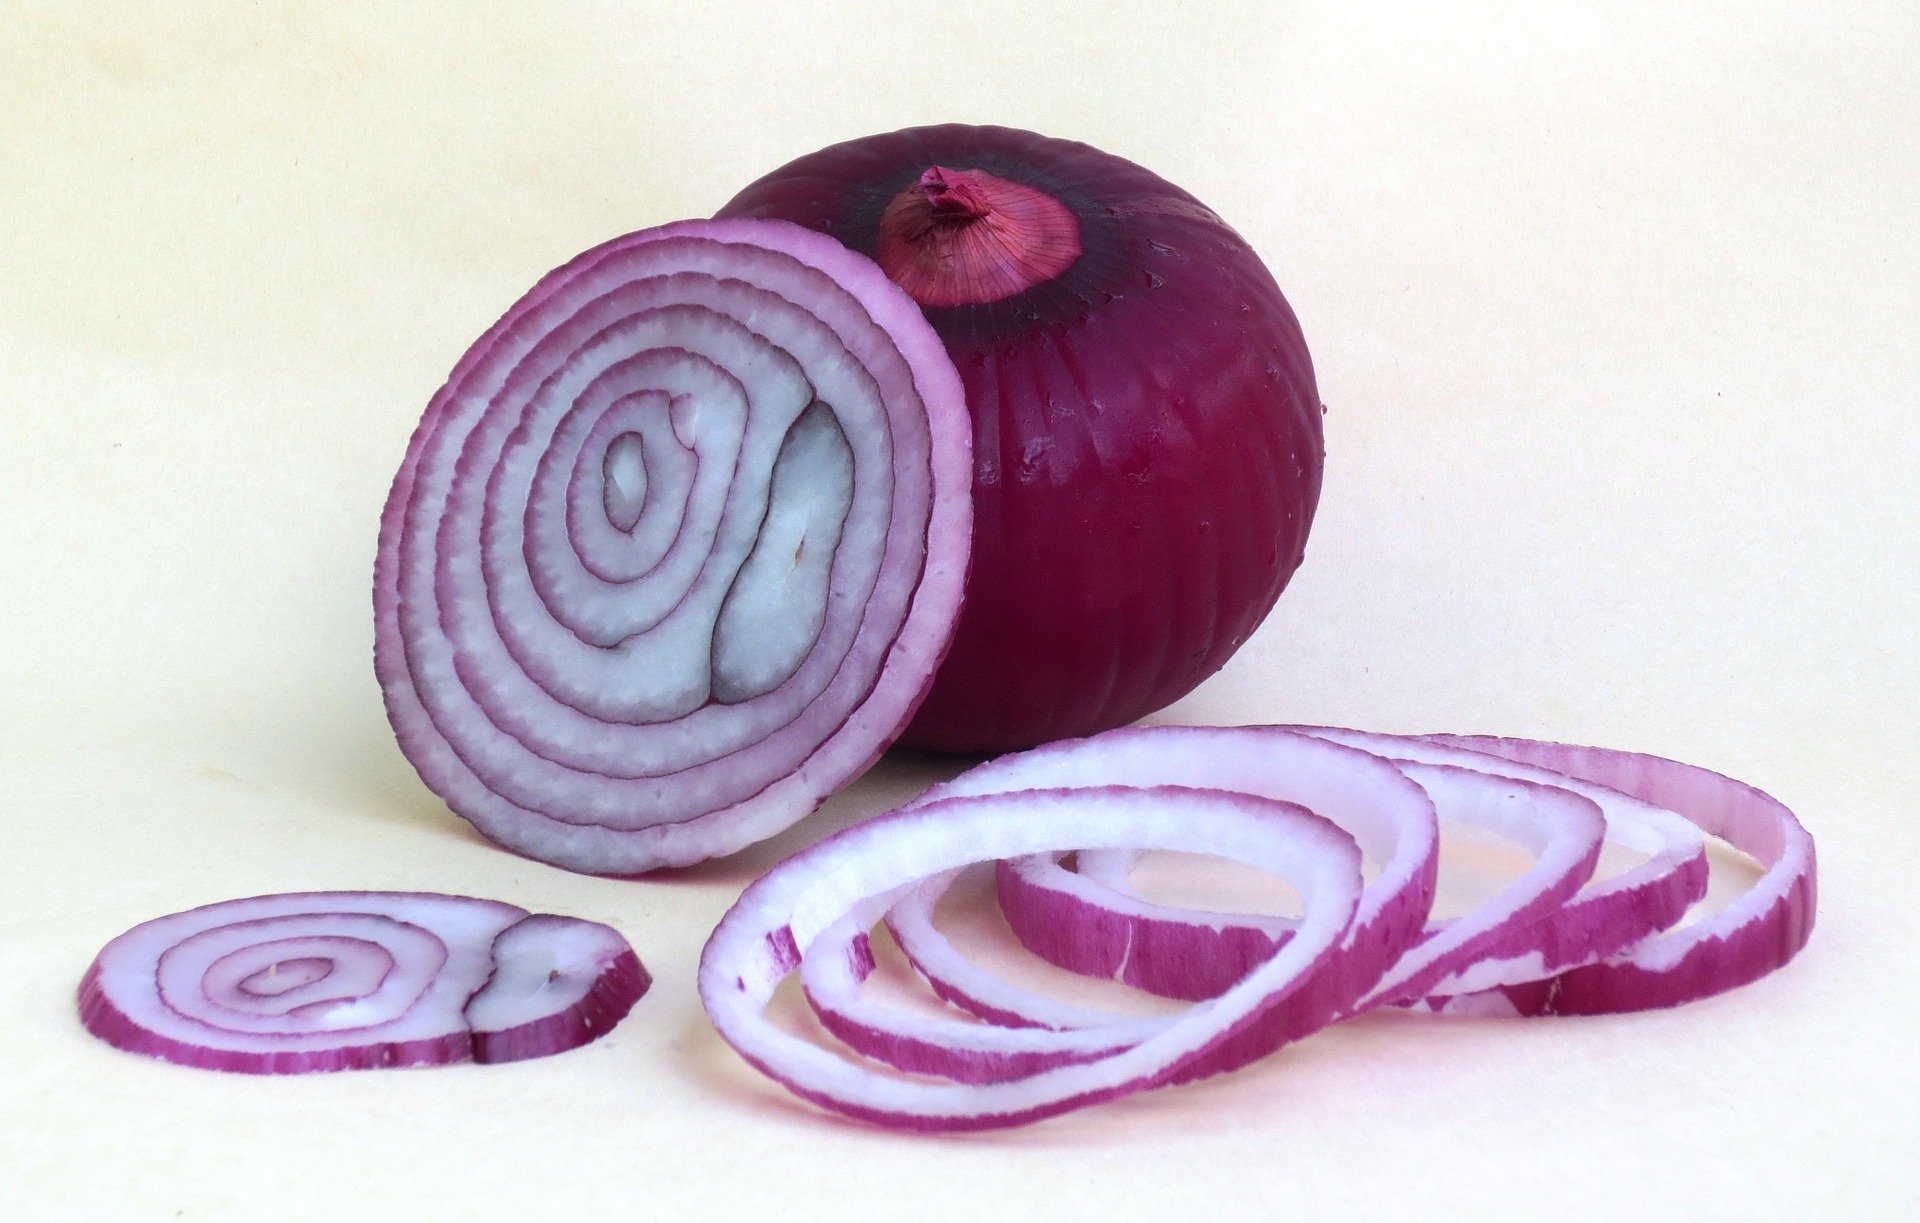 15 Health Benefits of Onion that will Amaze You